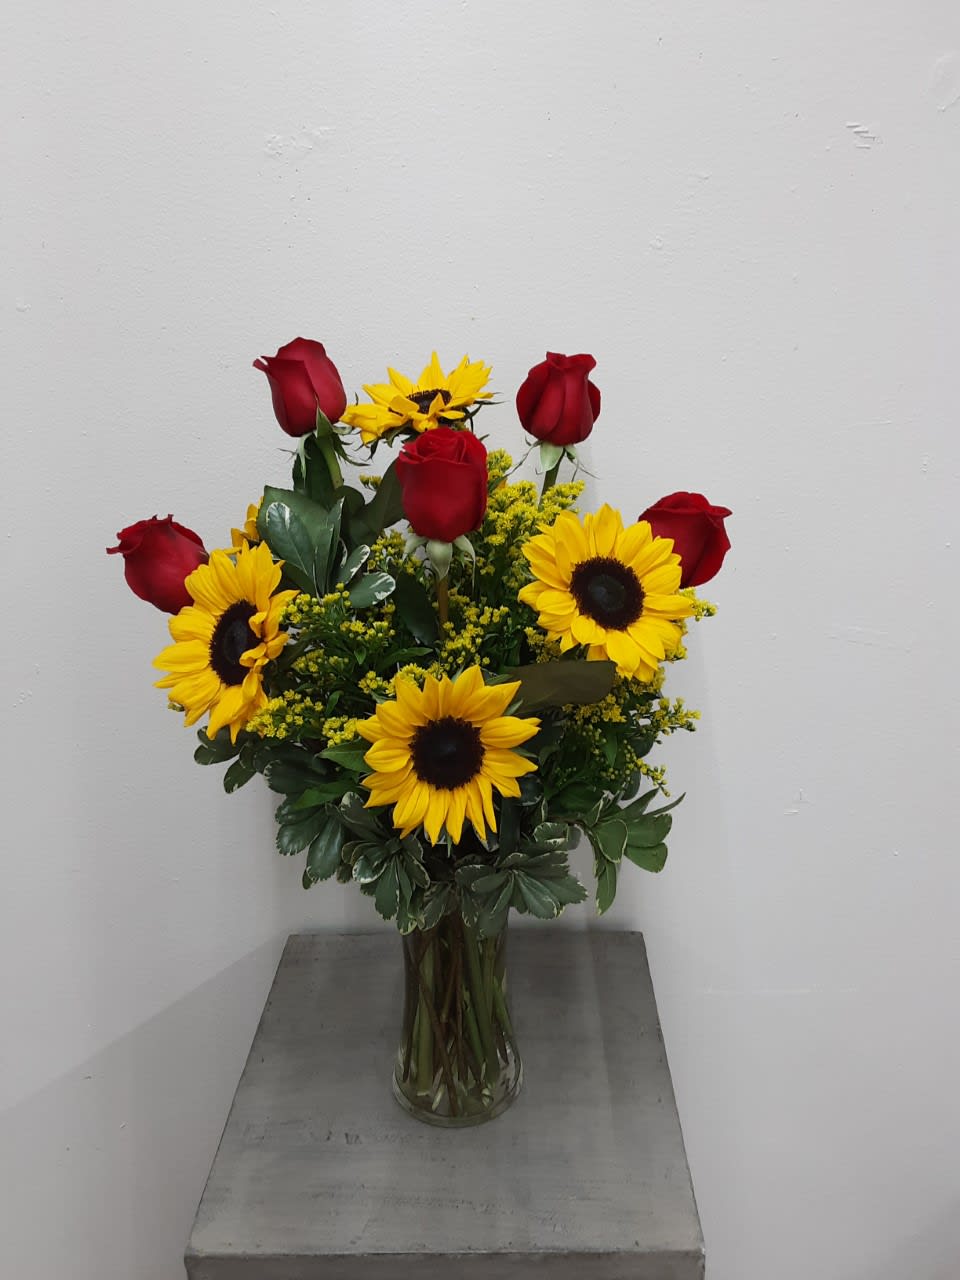 Sunflowers &amp; Roses Bouquet - Sunflowers &amp; red roses arranged together in a vase with filler and greenery.  Standard: 6 sunflowers, 6 roses Deluxe: 9 sunflowers, 9 roses Premium: 12 sunflowers, 12 roses